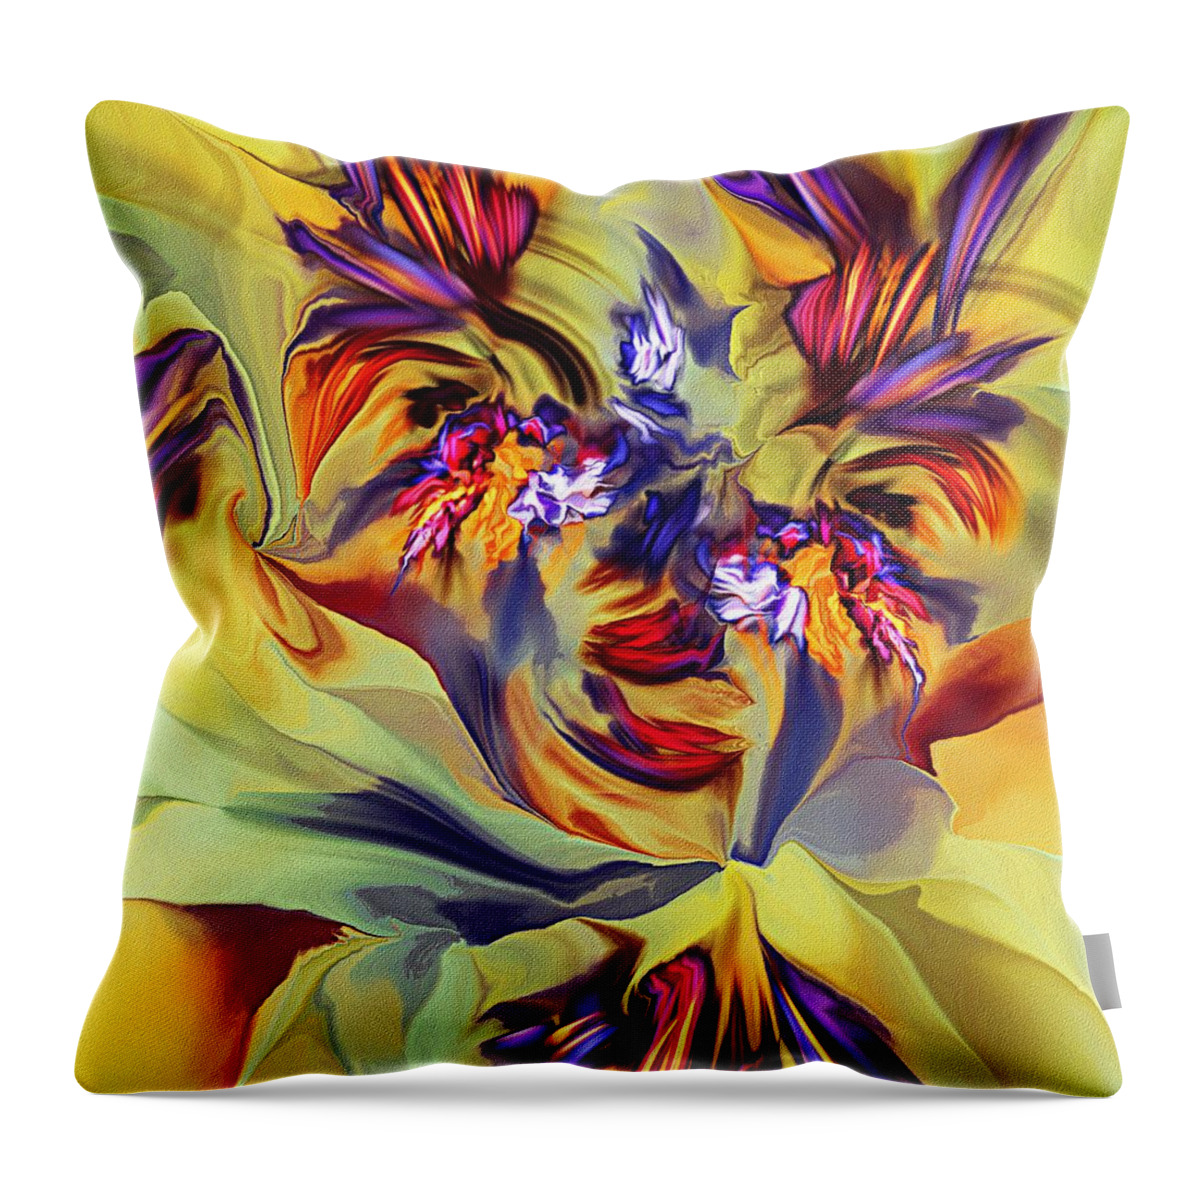 Fine Art Throw Pillow featuring the digital art Explosive Floral by David Lane